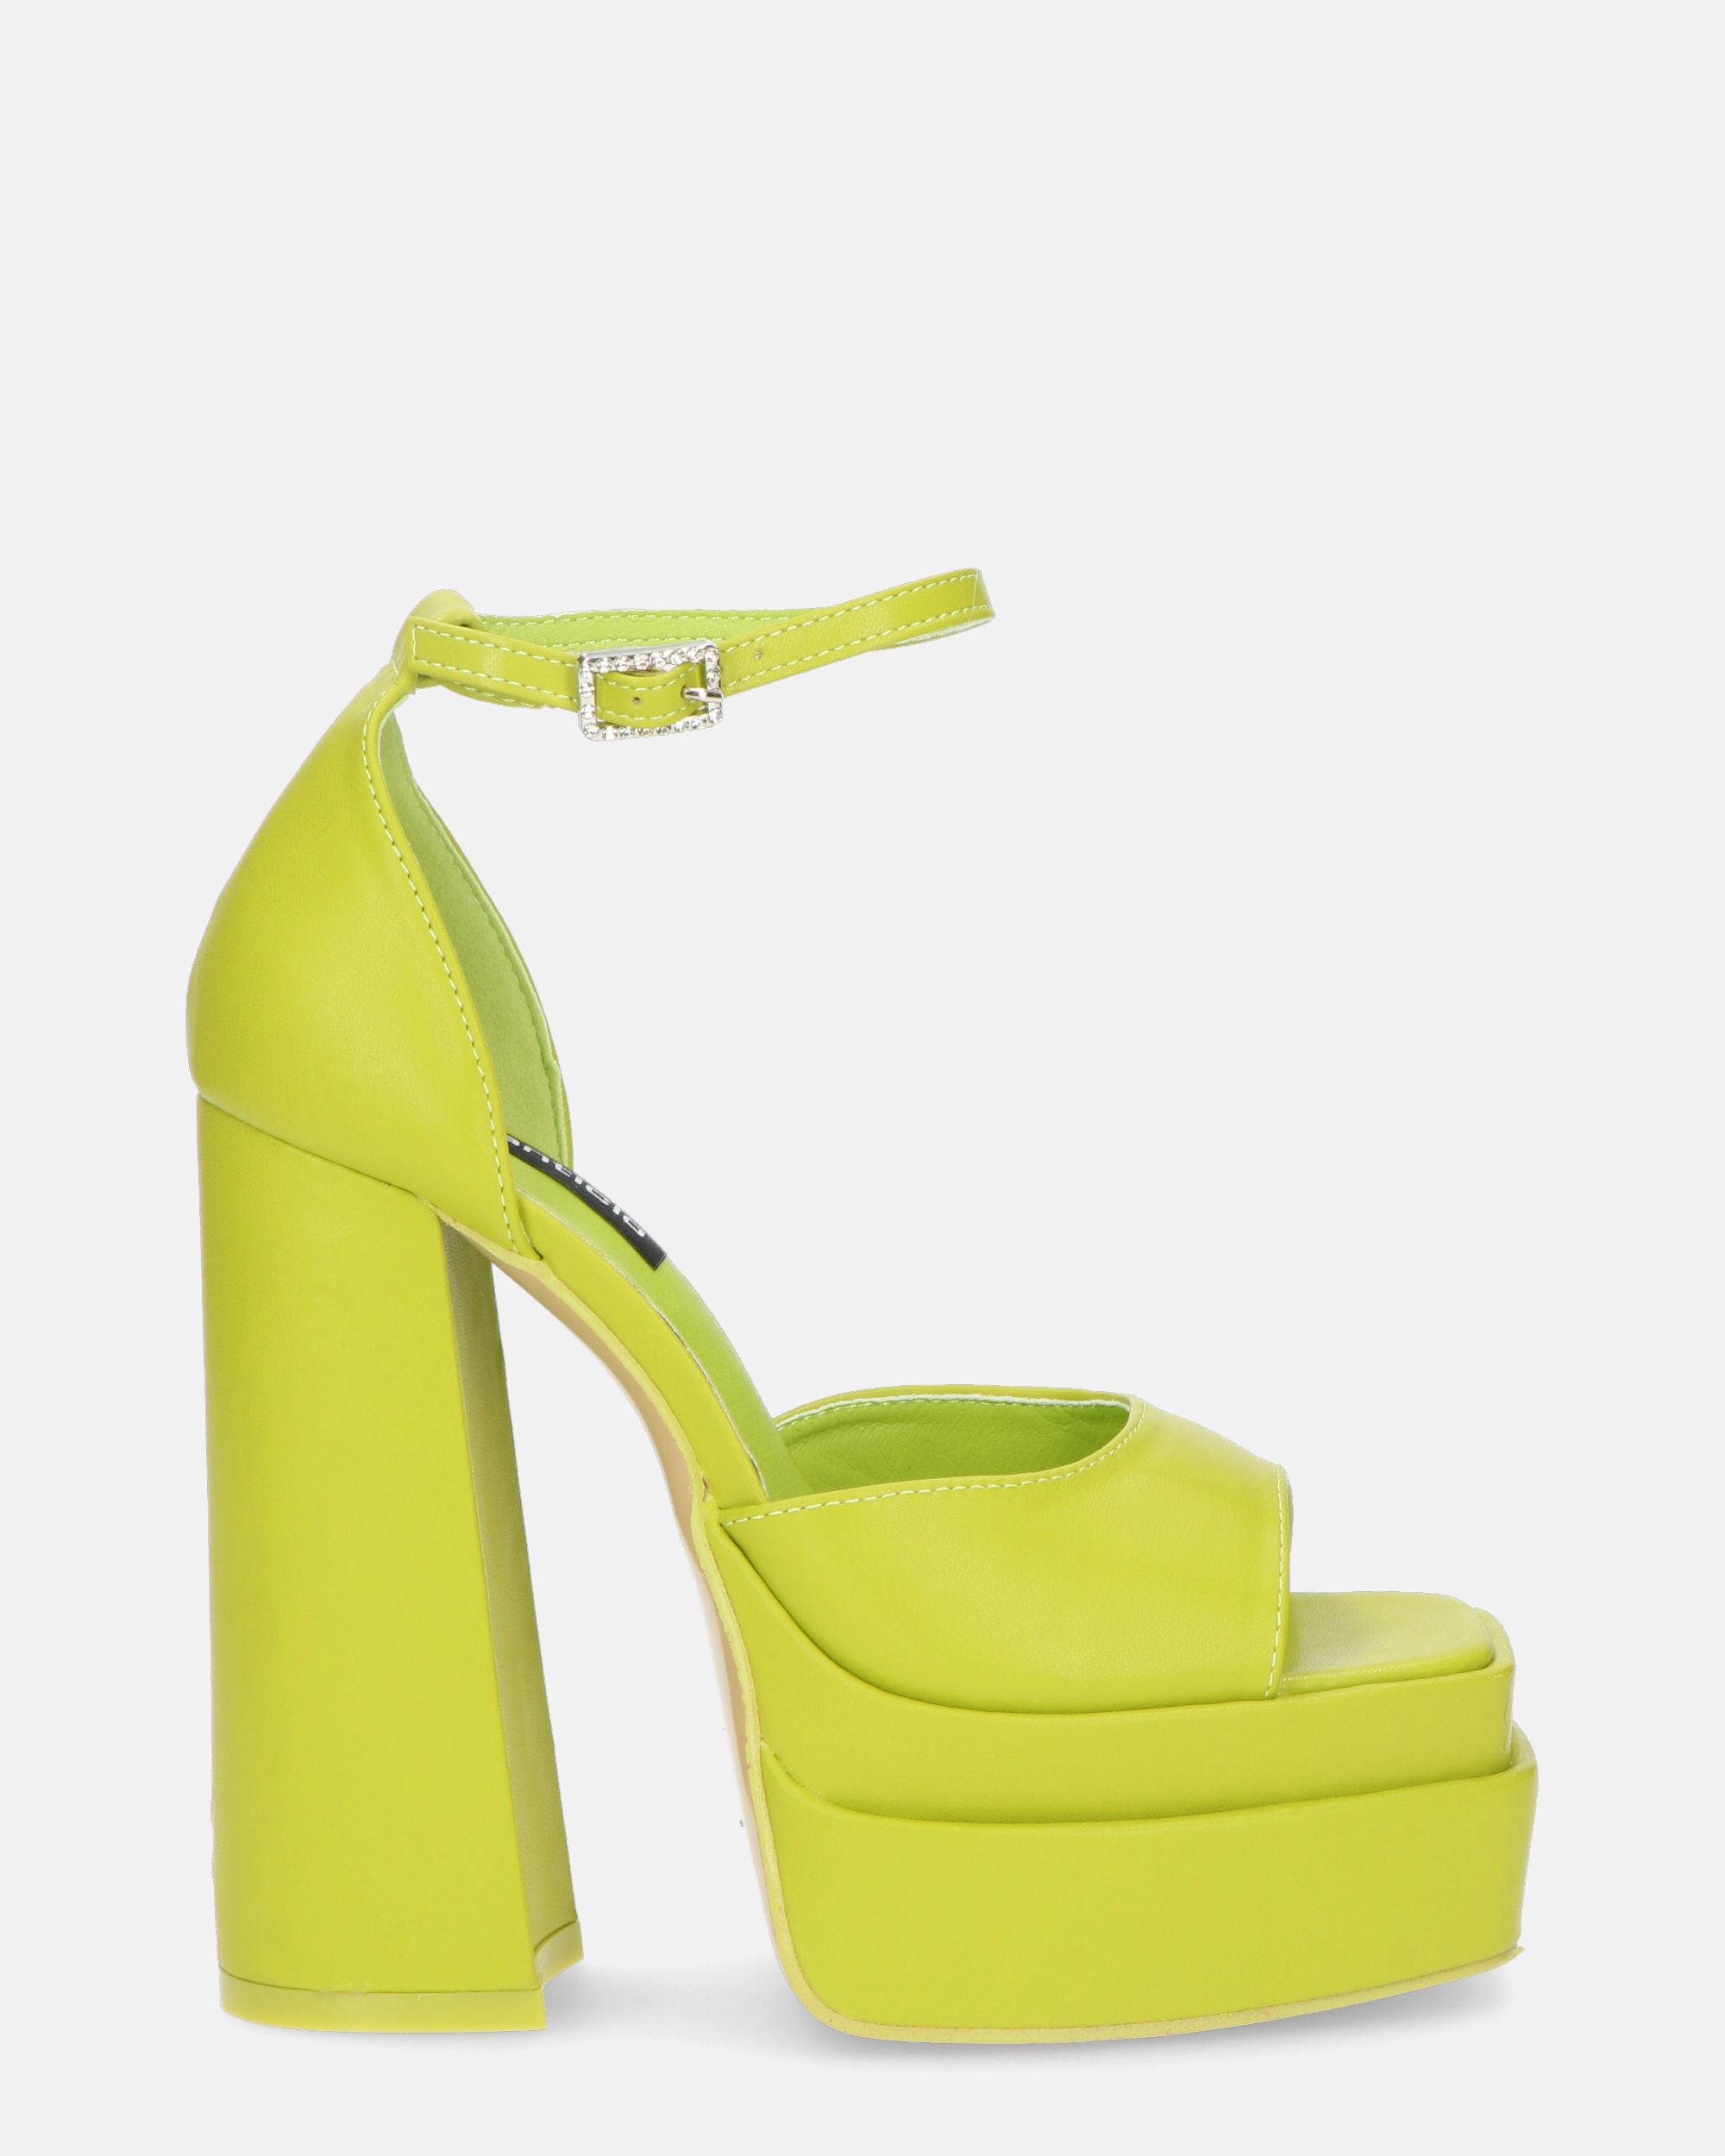 AVA - sandals with high heels in green eco-leather and gems in the strap